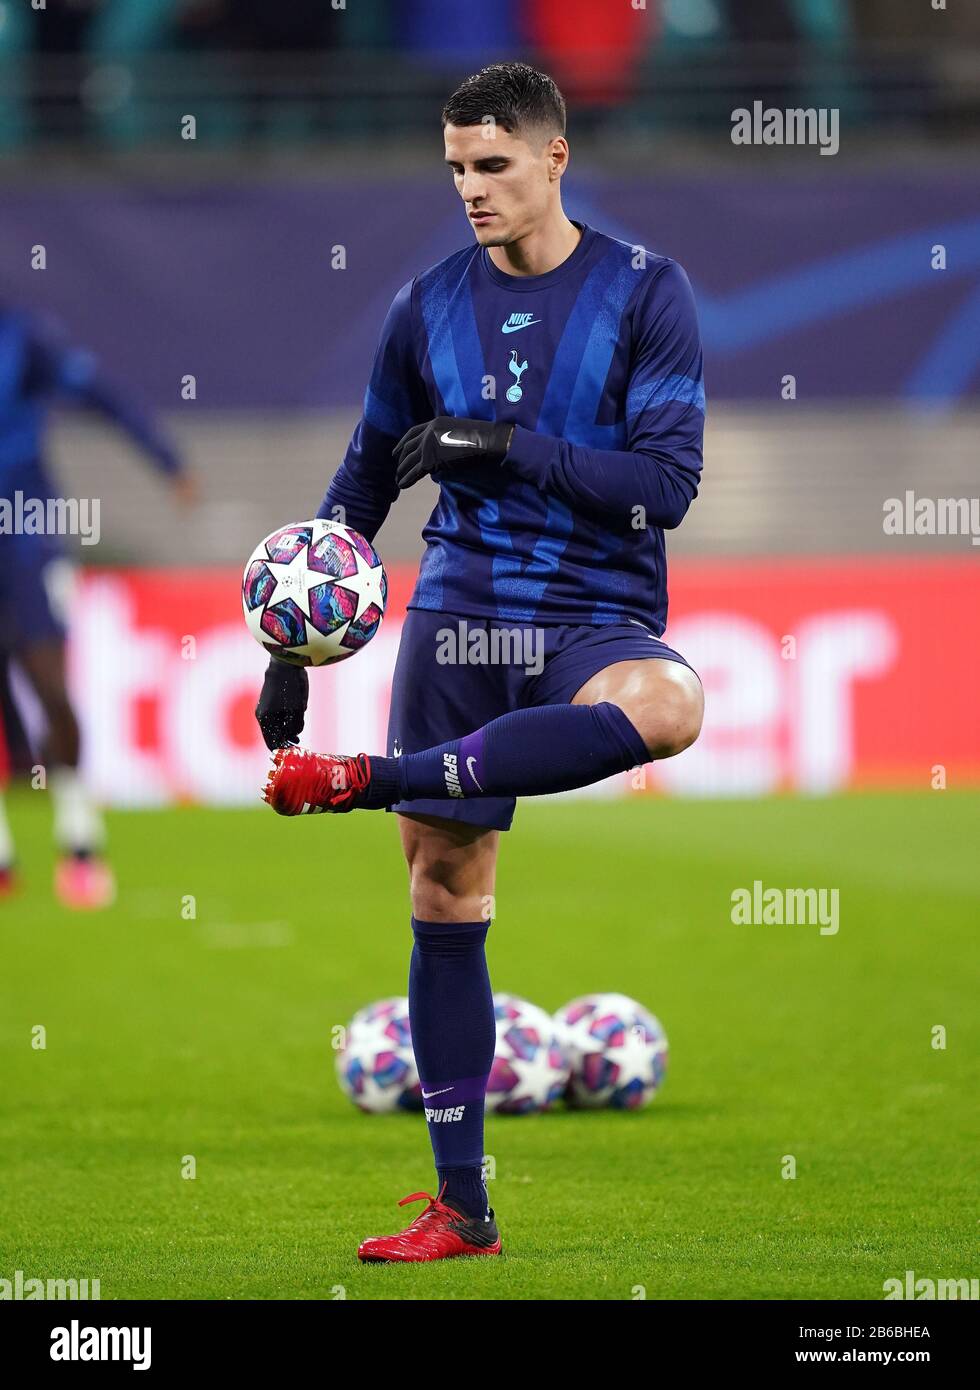 Tottenham Hotspur's Erik Lamela warms up ahead of the UEFA Champions League round of 16 second leg match at the Red Bull Arena, Leipzig. Stock Photo